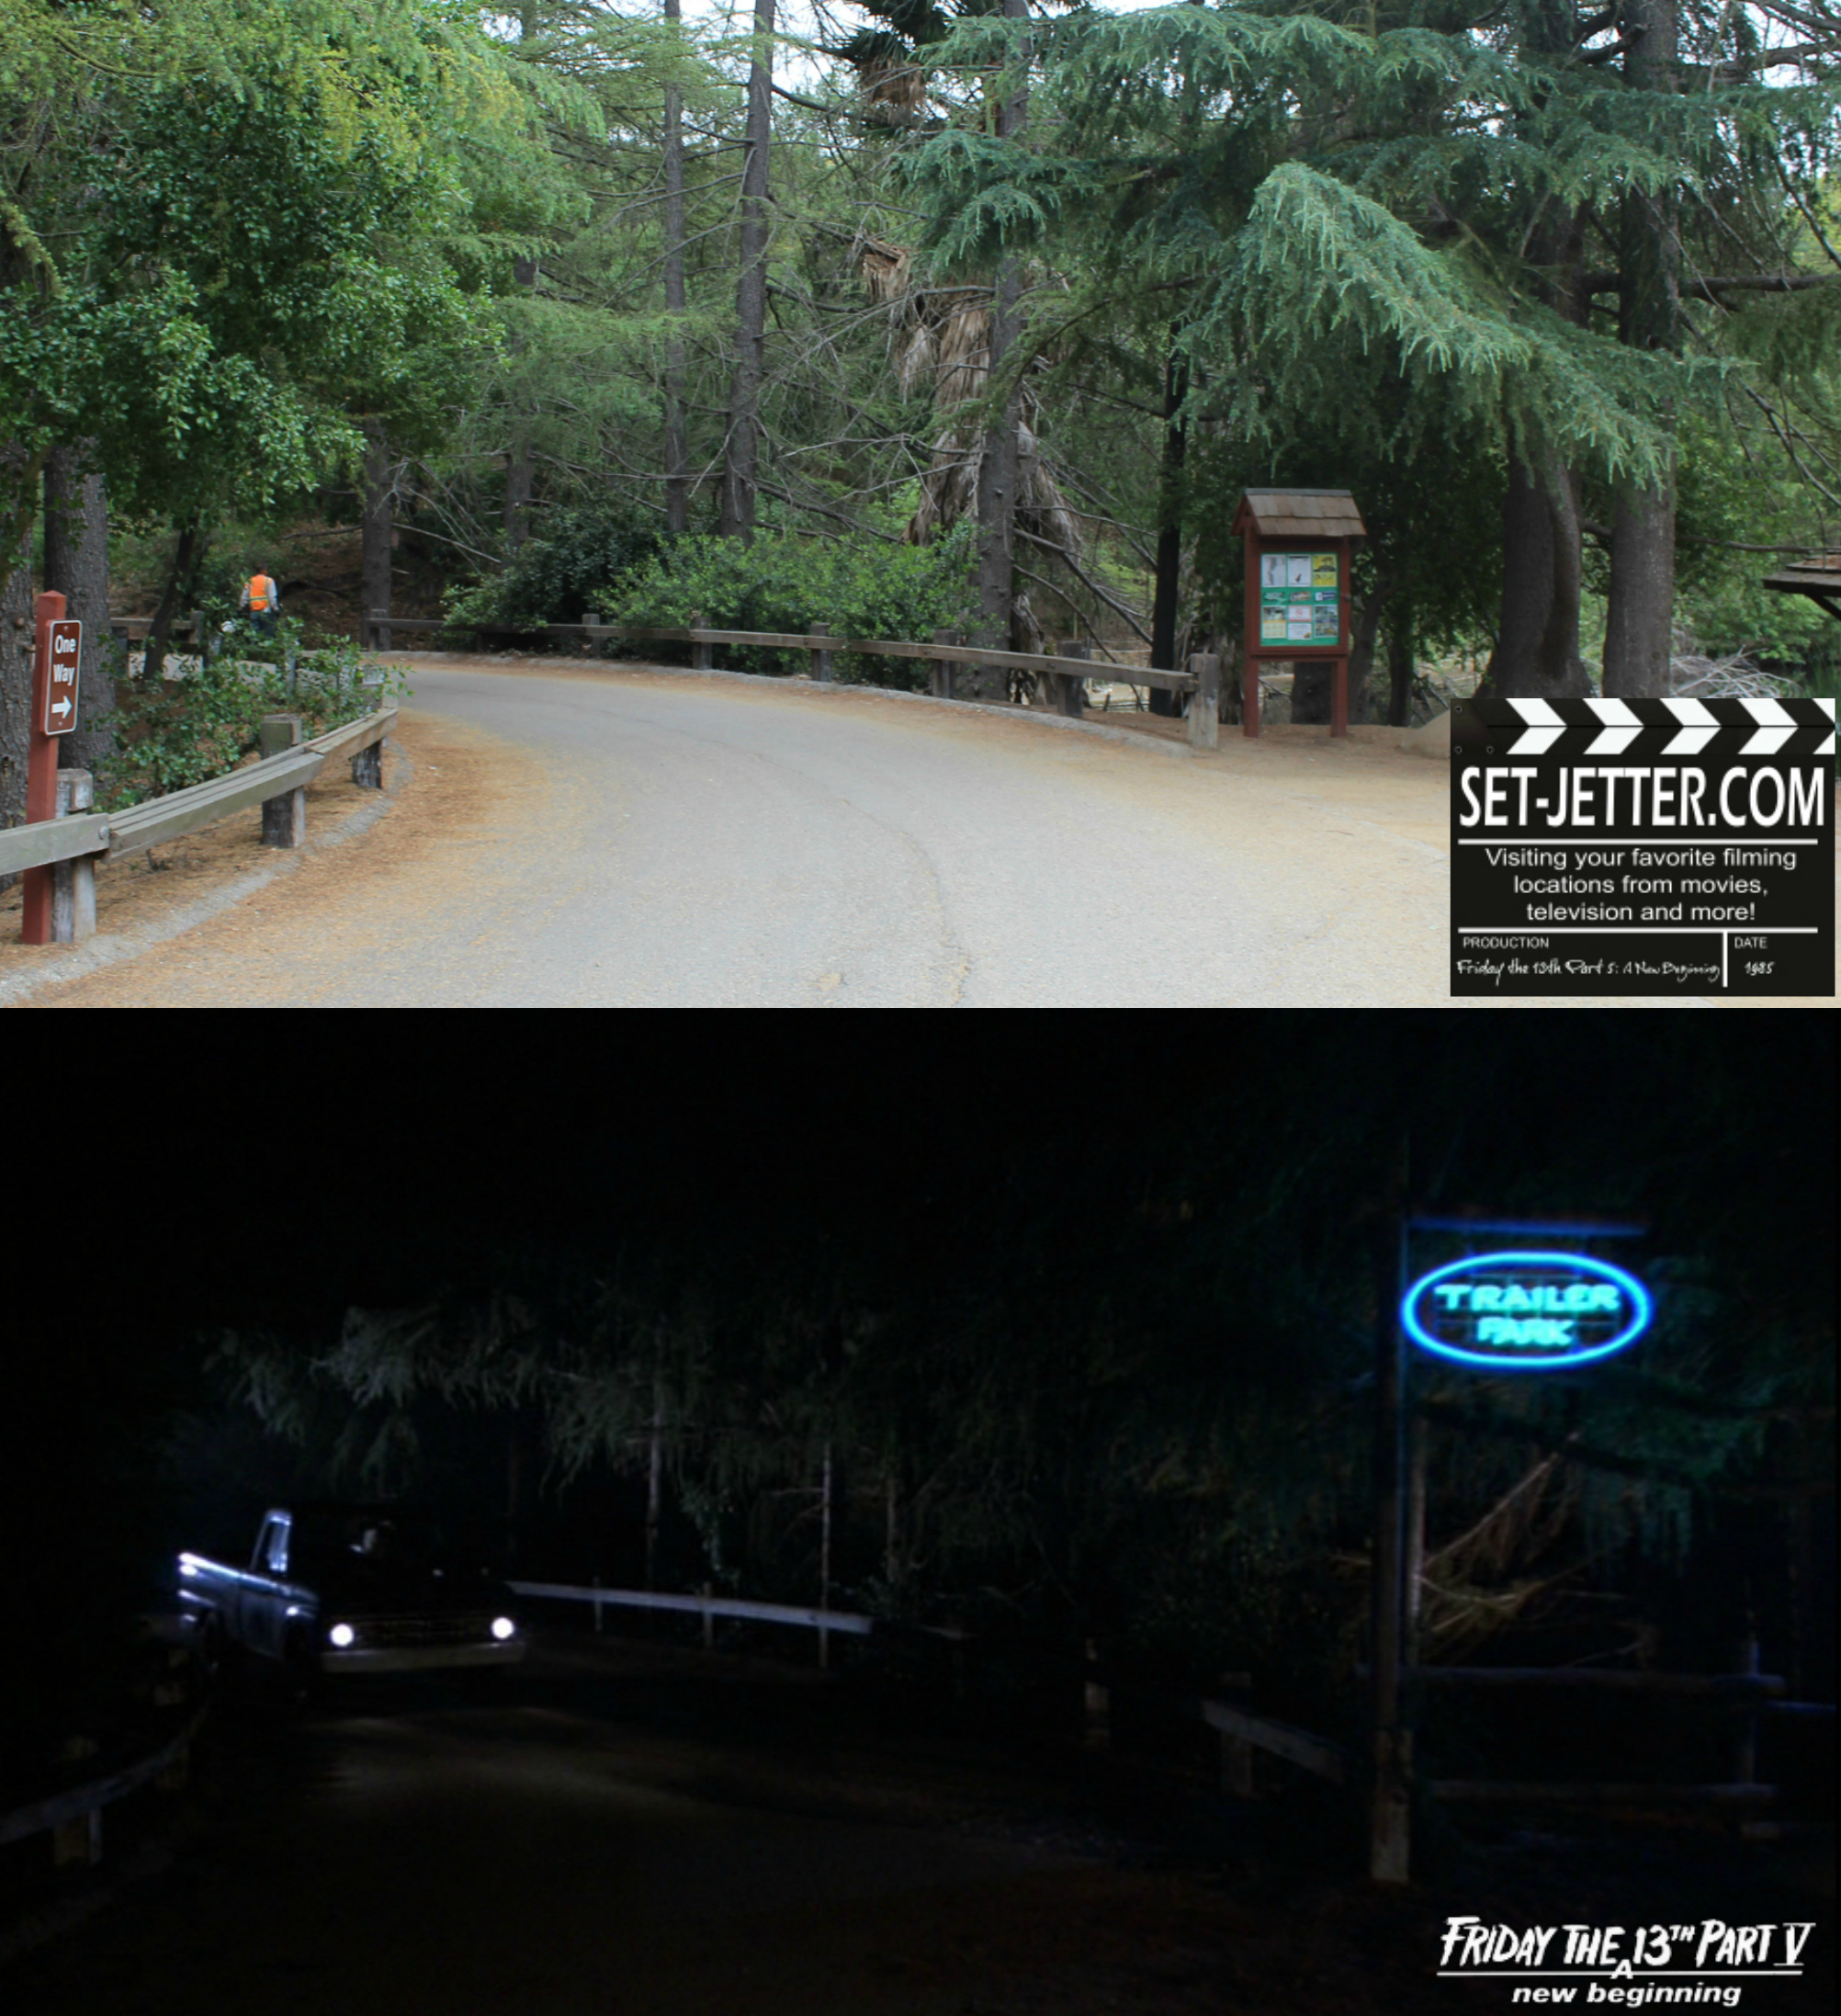 Friday the 13th Part V comparison 31.jpg